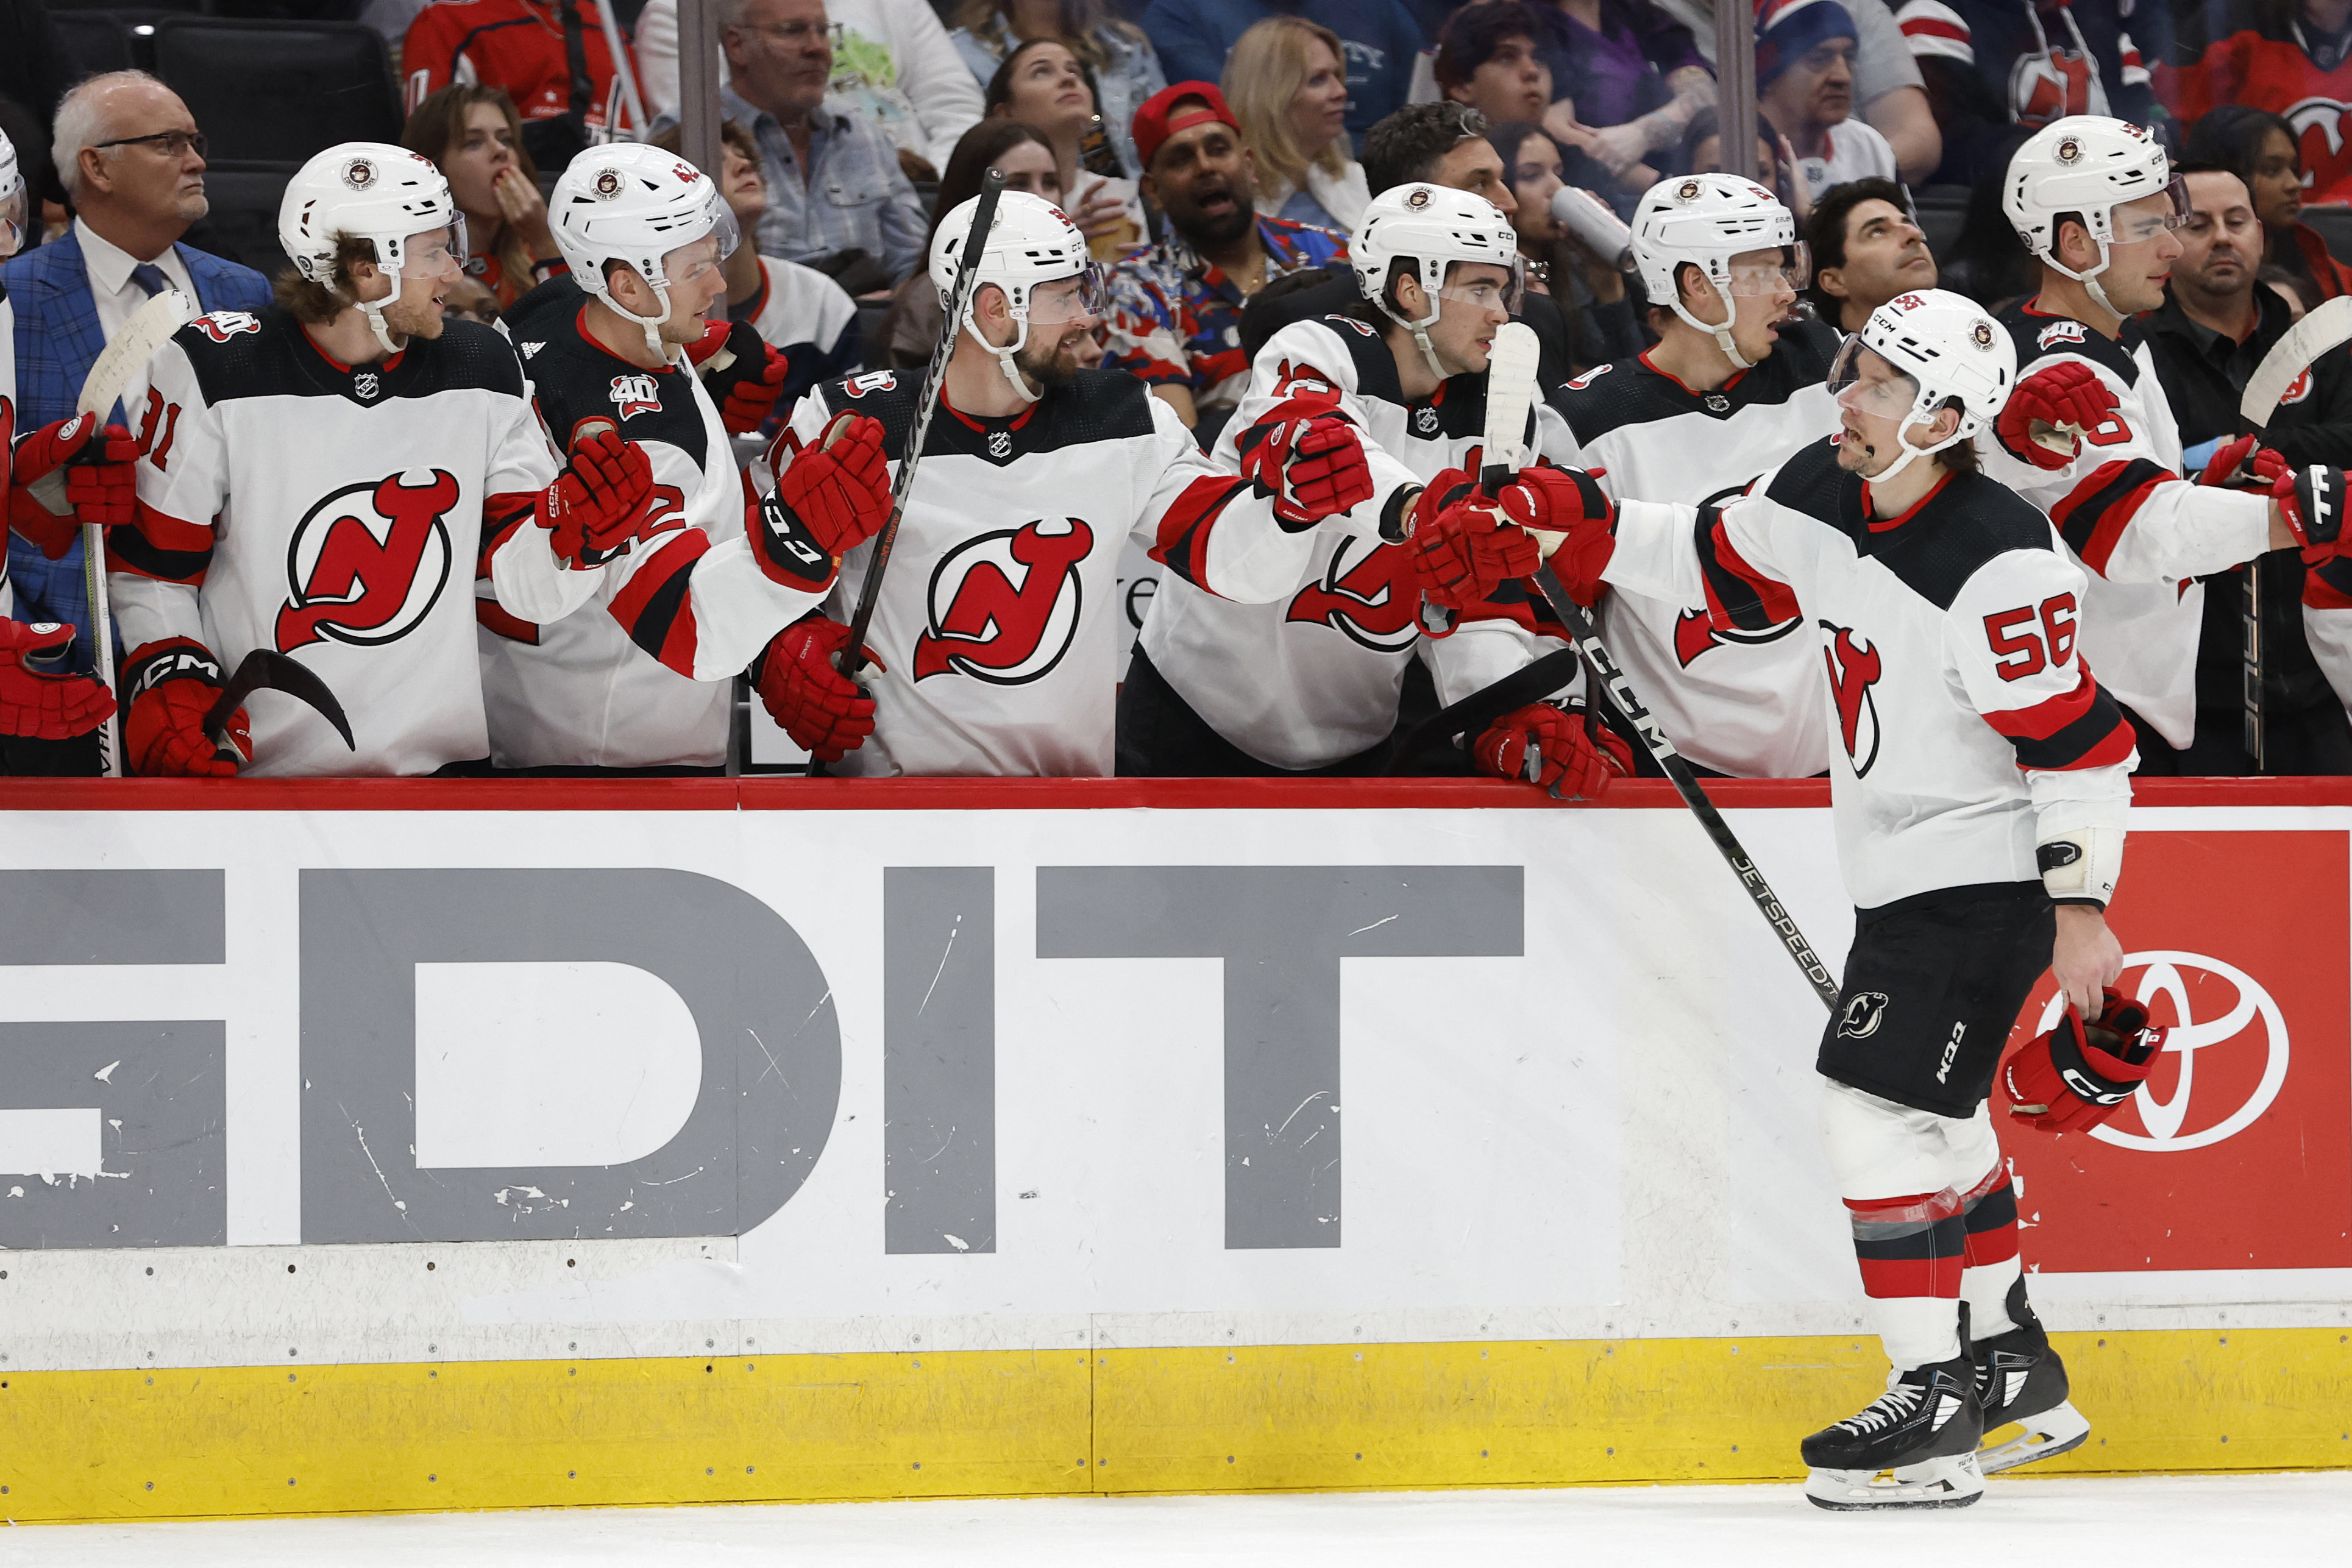 Devils at the 2019 IIHF World Championship Roundup - All About The